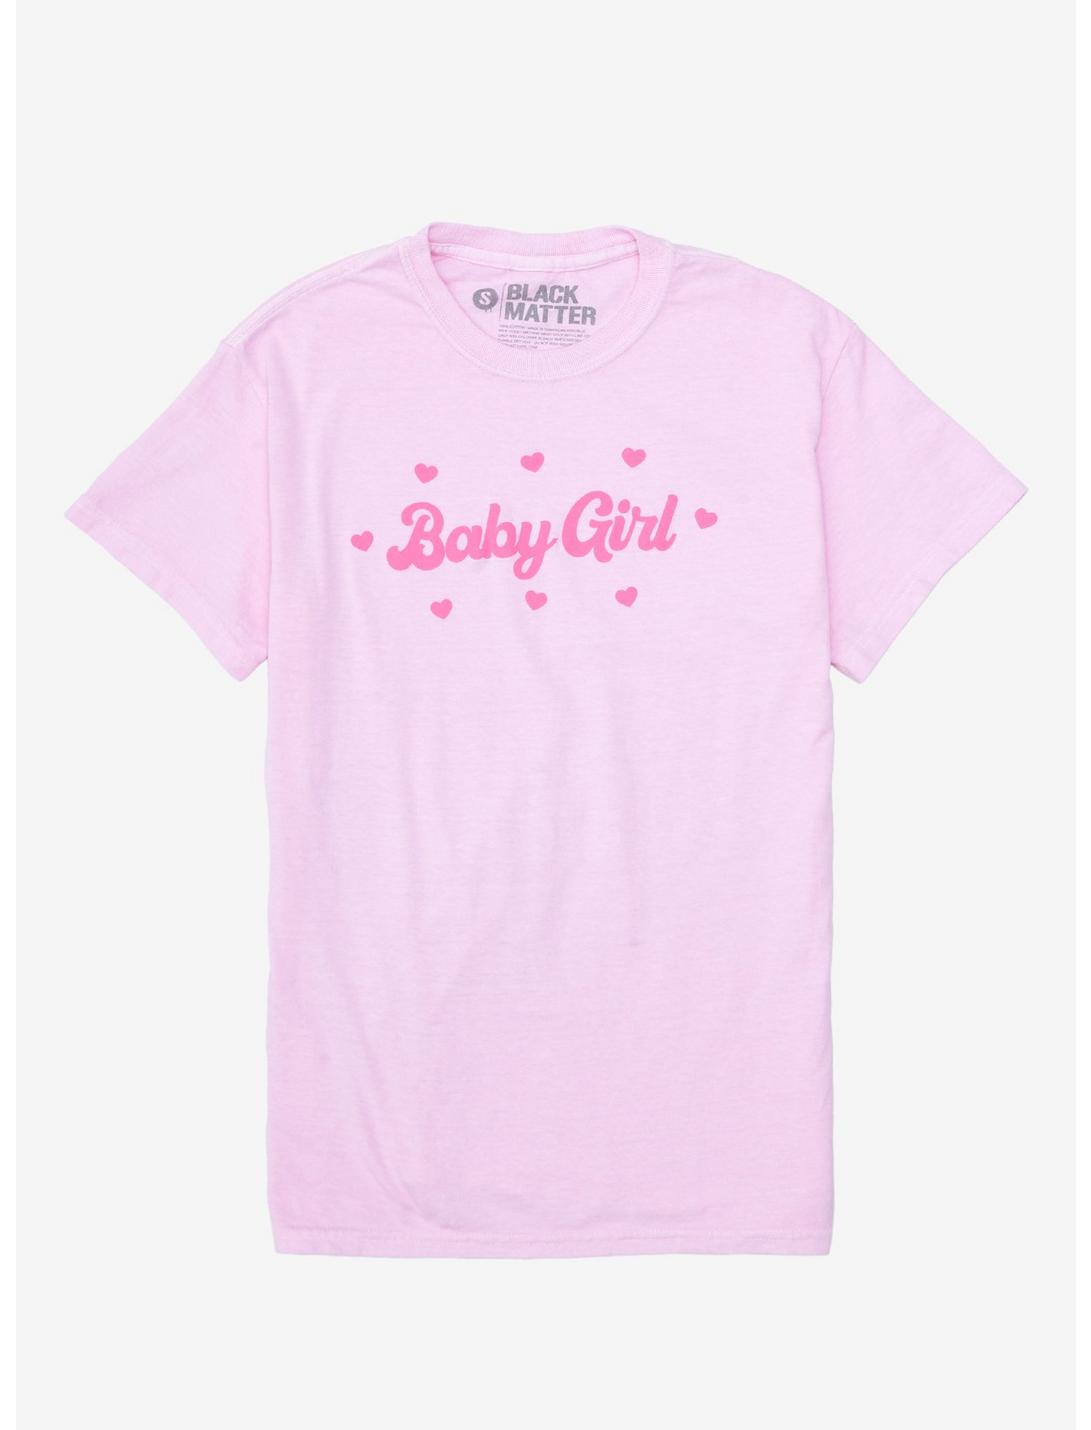 Baby Girl Hearts Girls T-Shirt Plus Size, PINK, hi-res